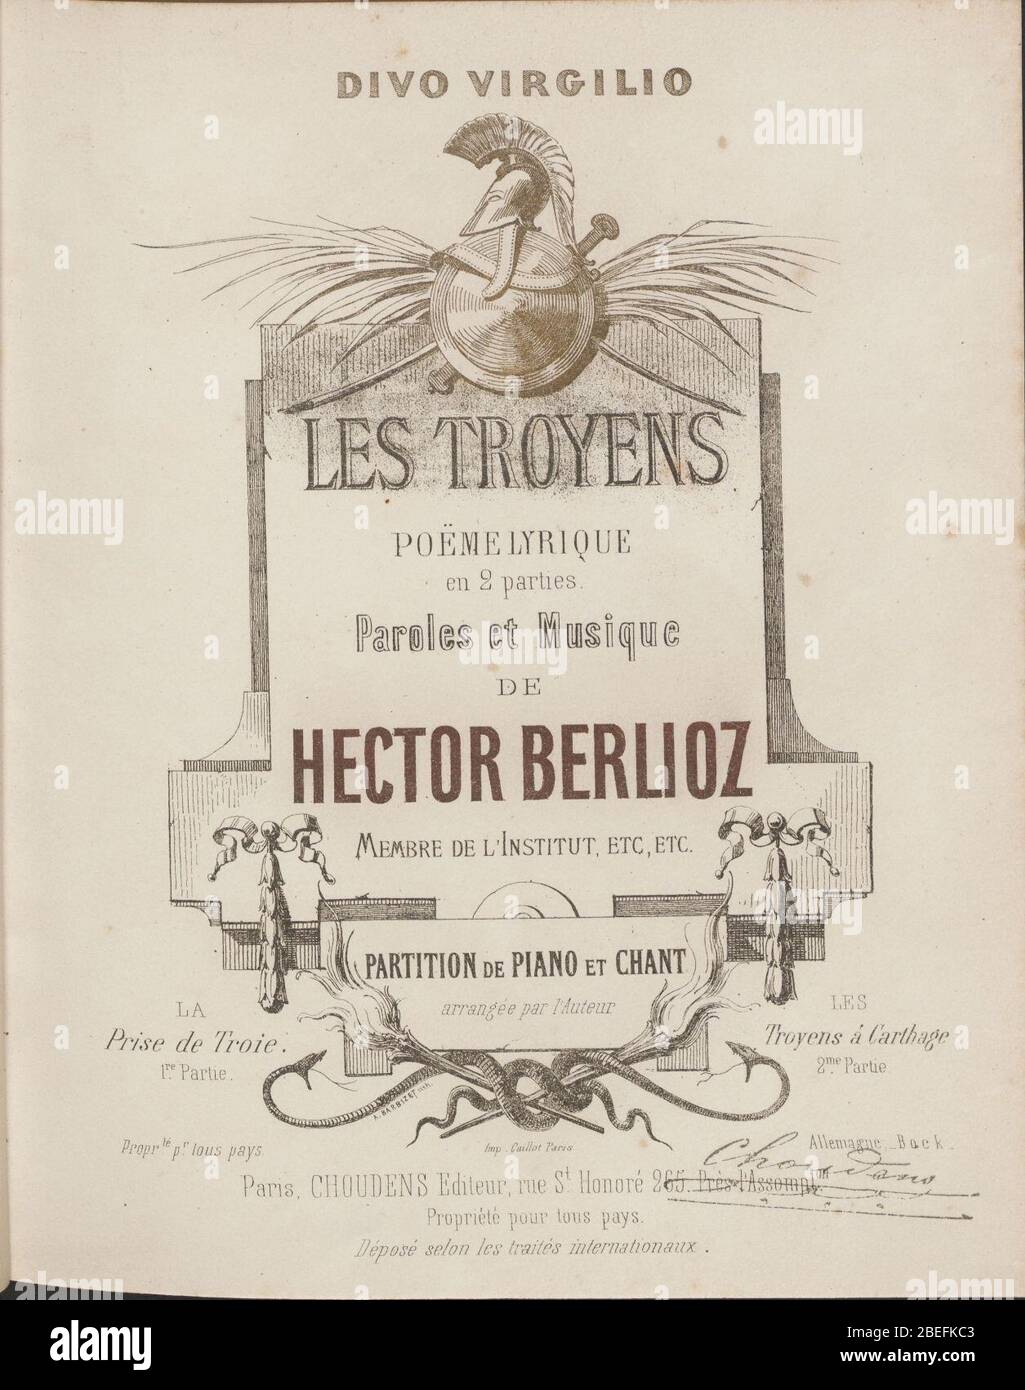 Hector Berlioz, Les Troyens Gesangsbuch Cover. Stockfoto